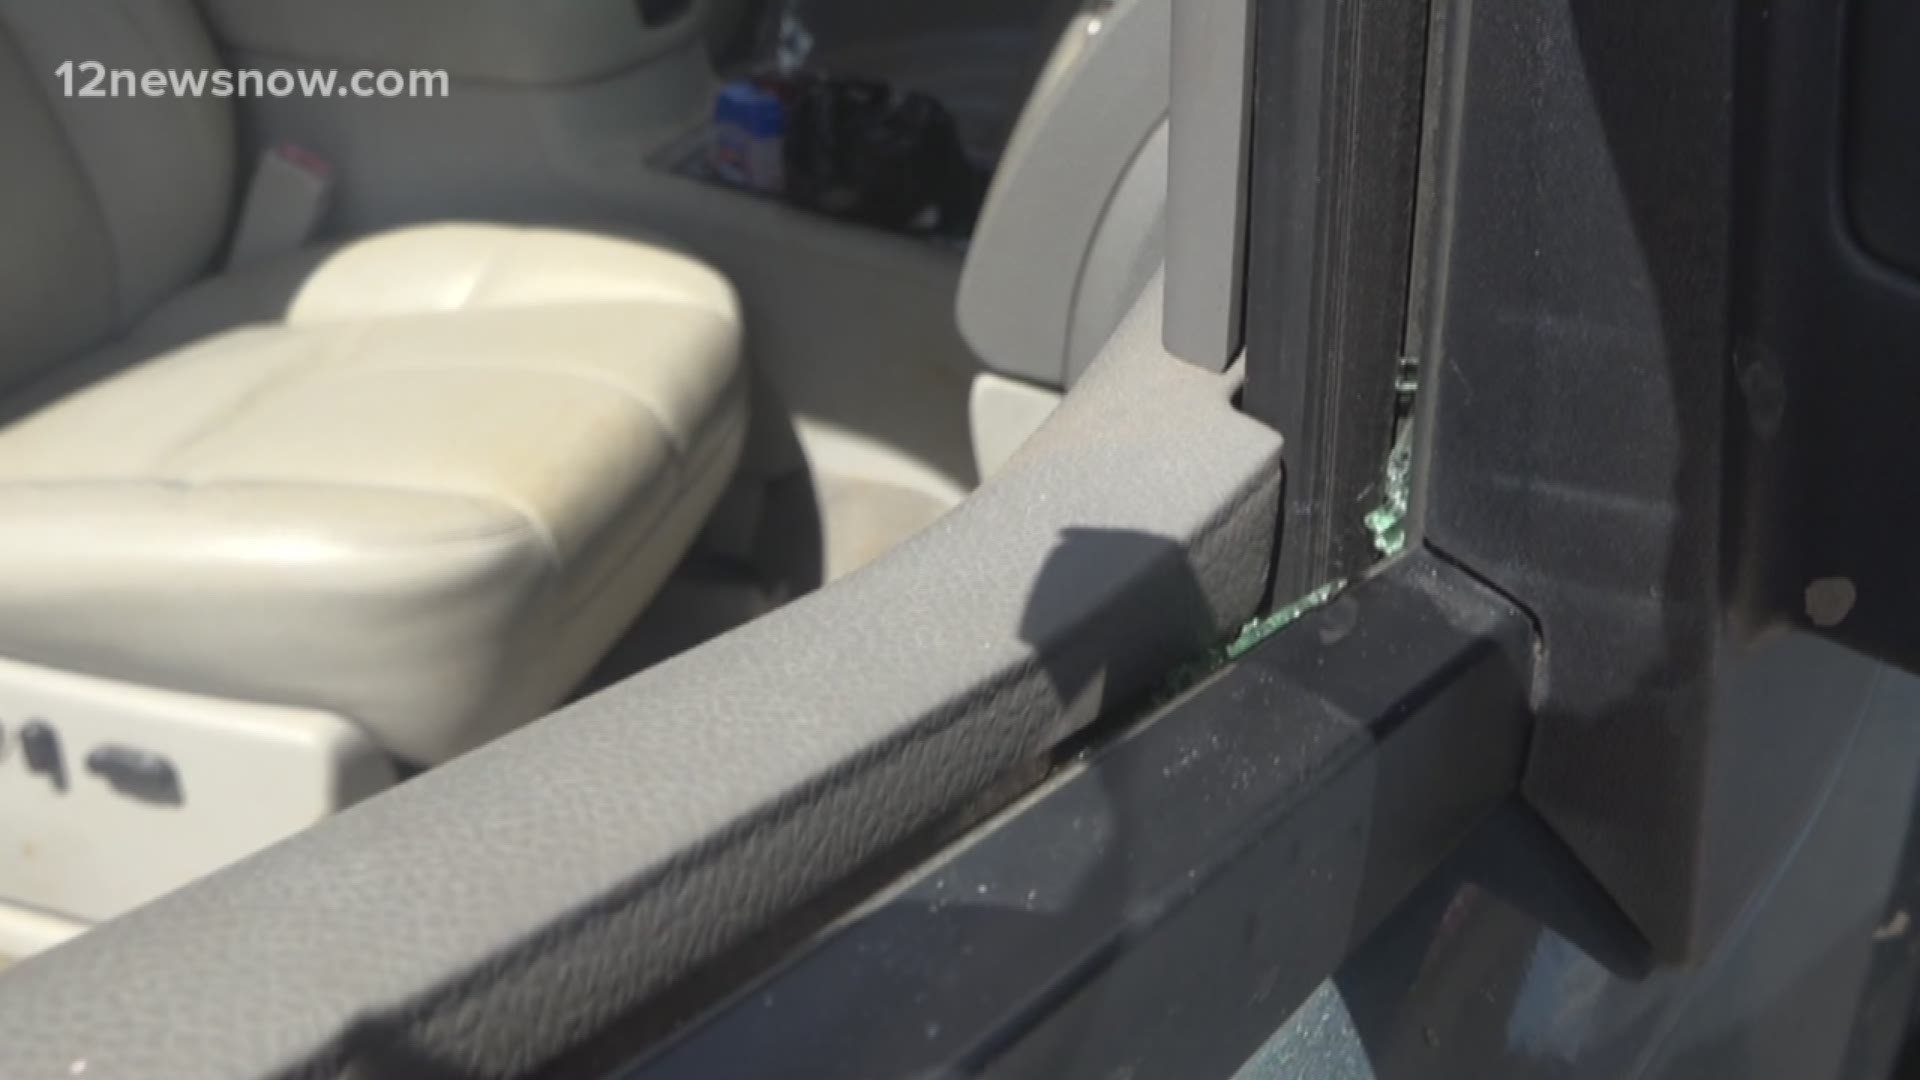 Police have not determined if Guillory is connected to the string of auto burglaries mostly taking place at